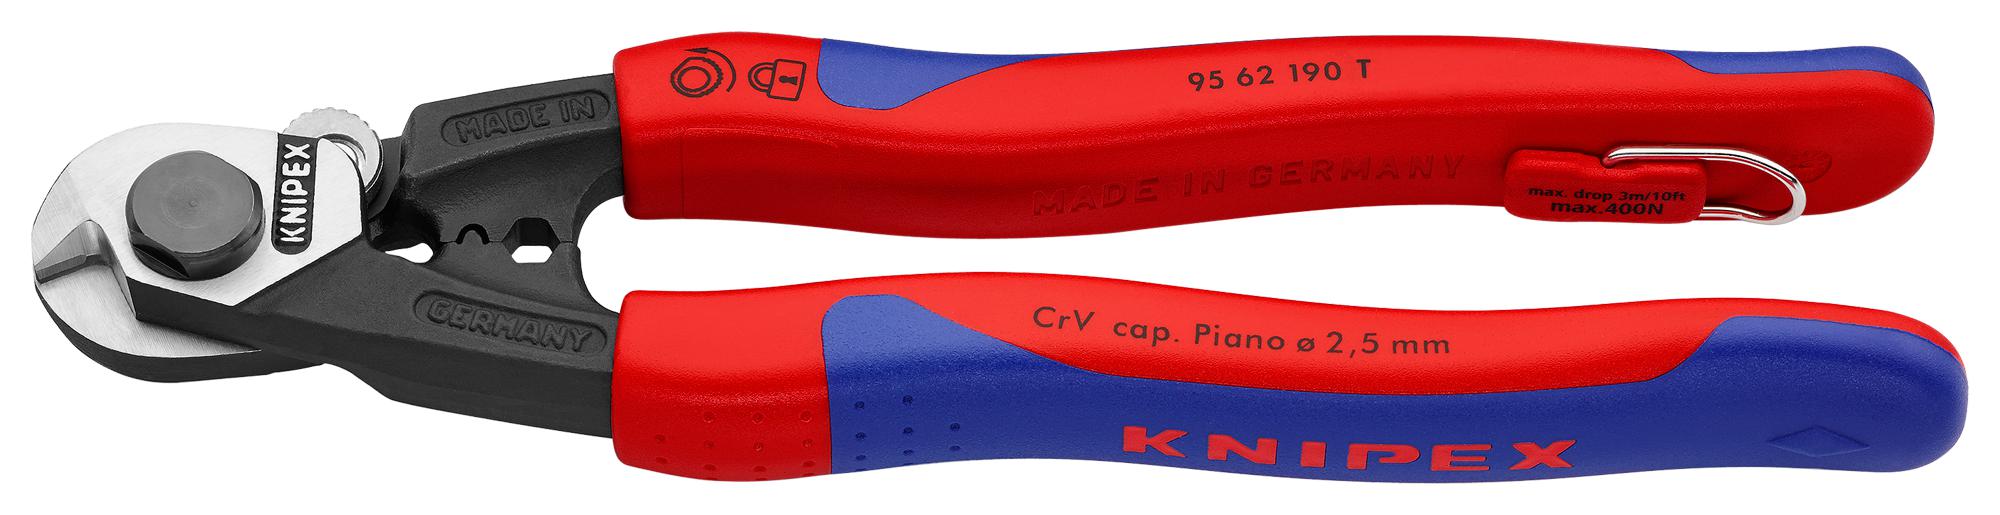 95 62 190 T WIRE CUTTER, 7MM, 190MM KNIPEX